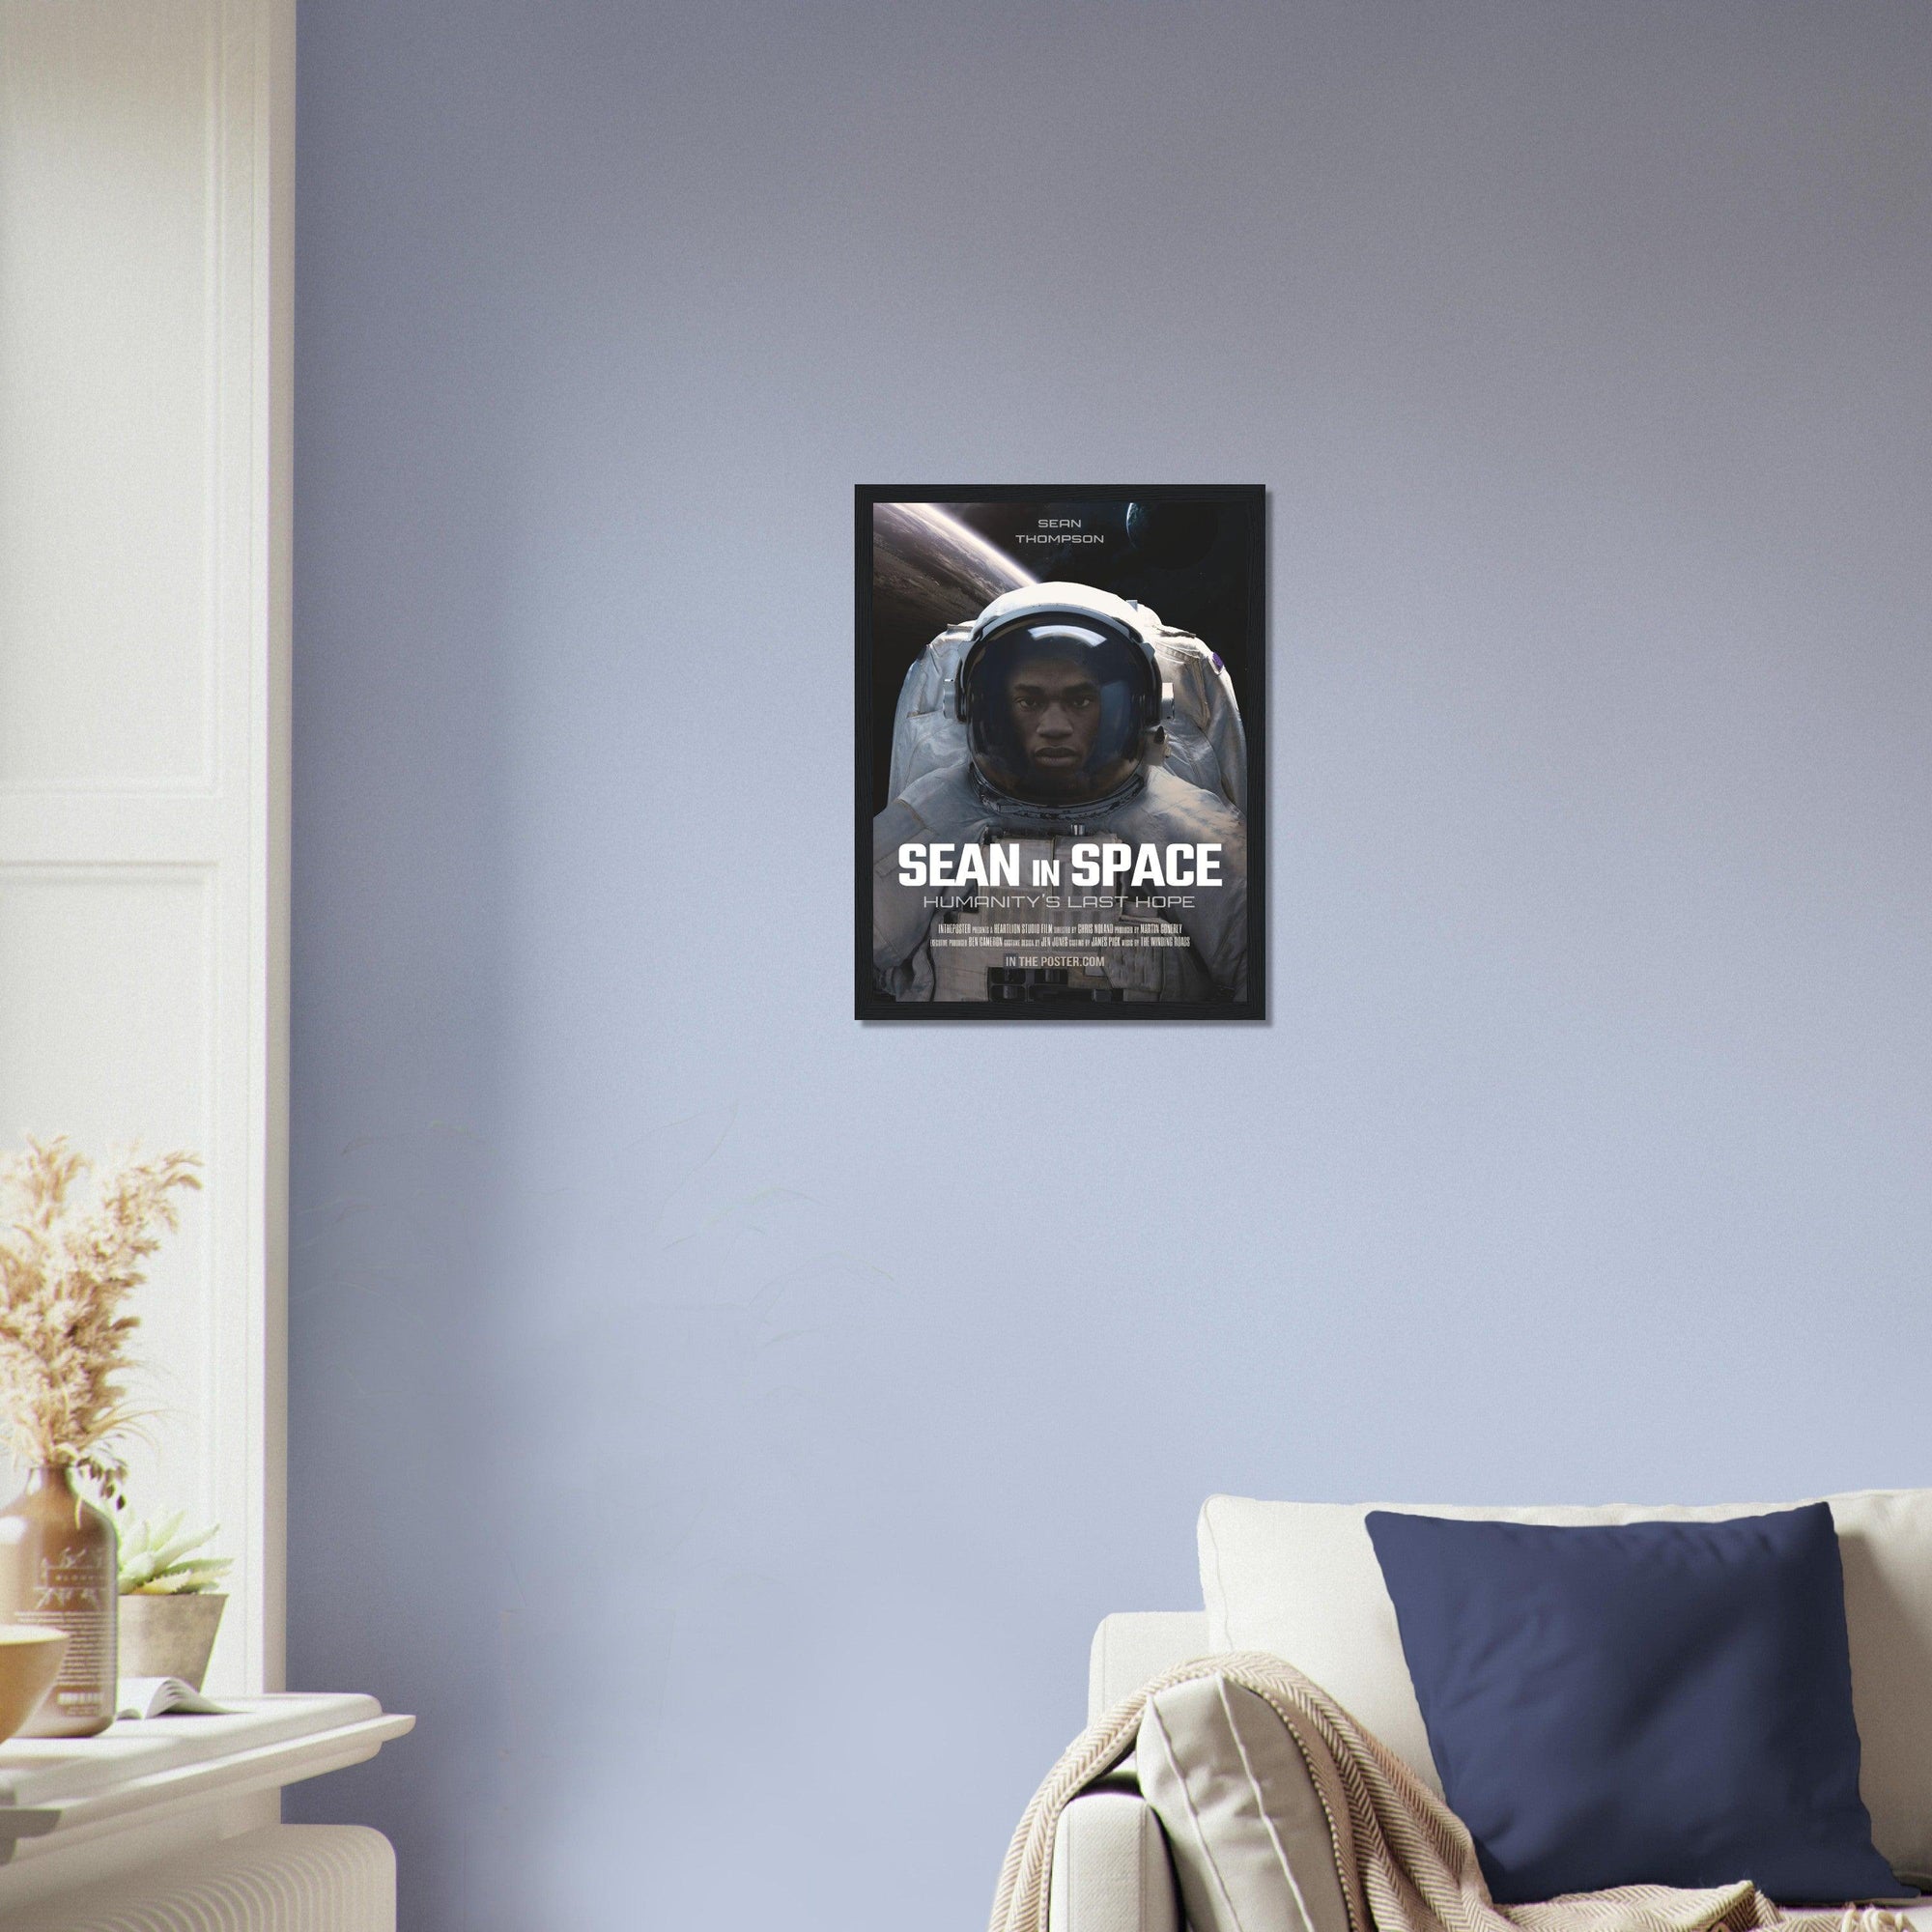 An astronaut sci-fi movie poster design in a small black frame on a blue wall above a designer sofa